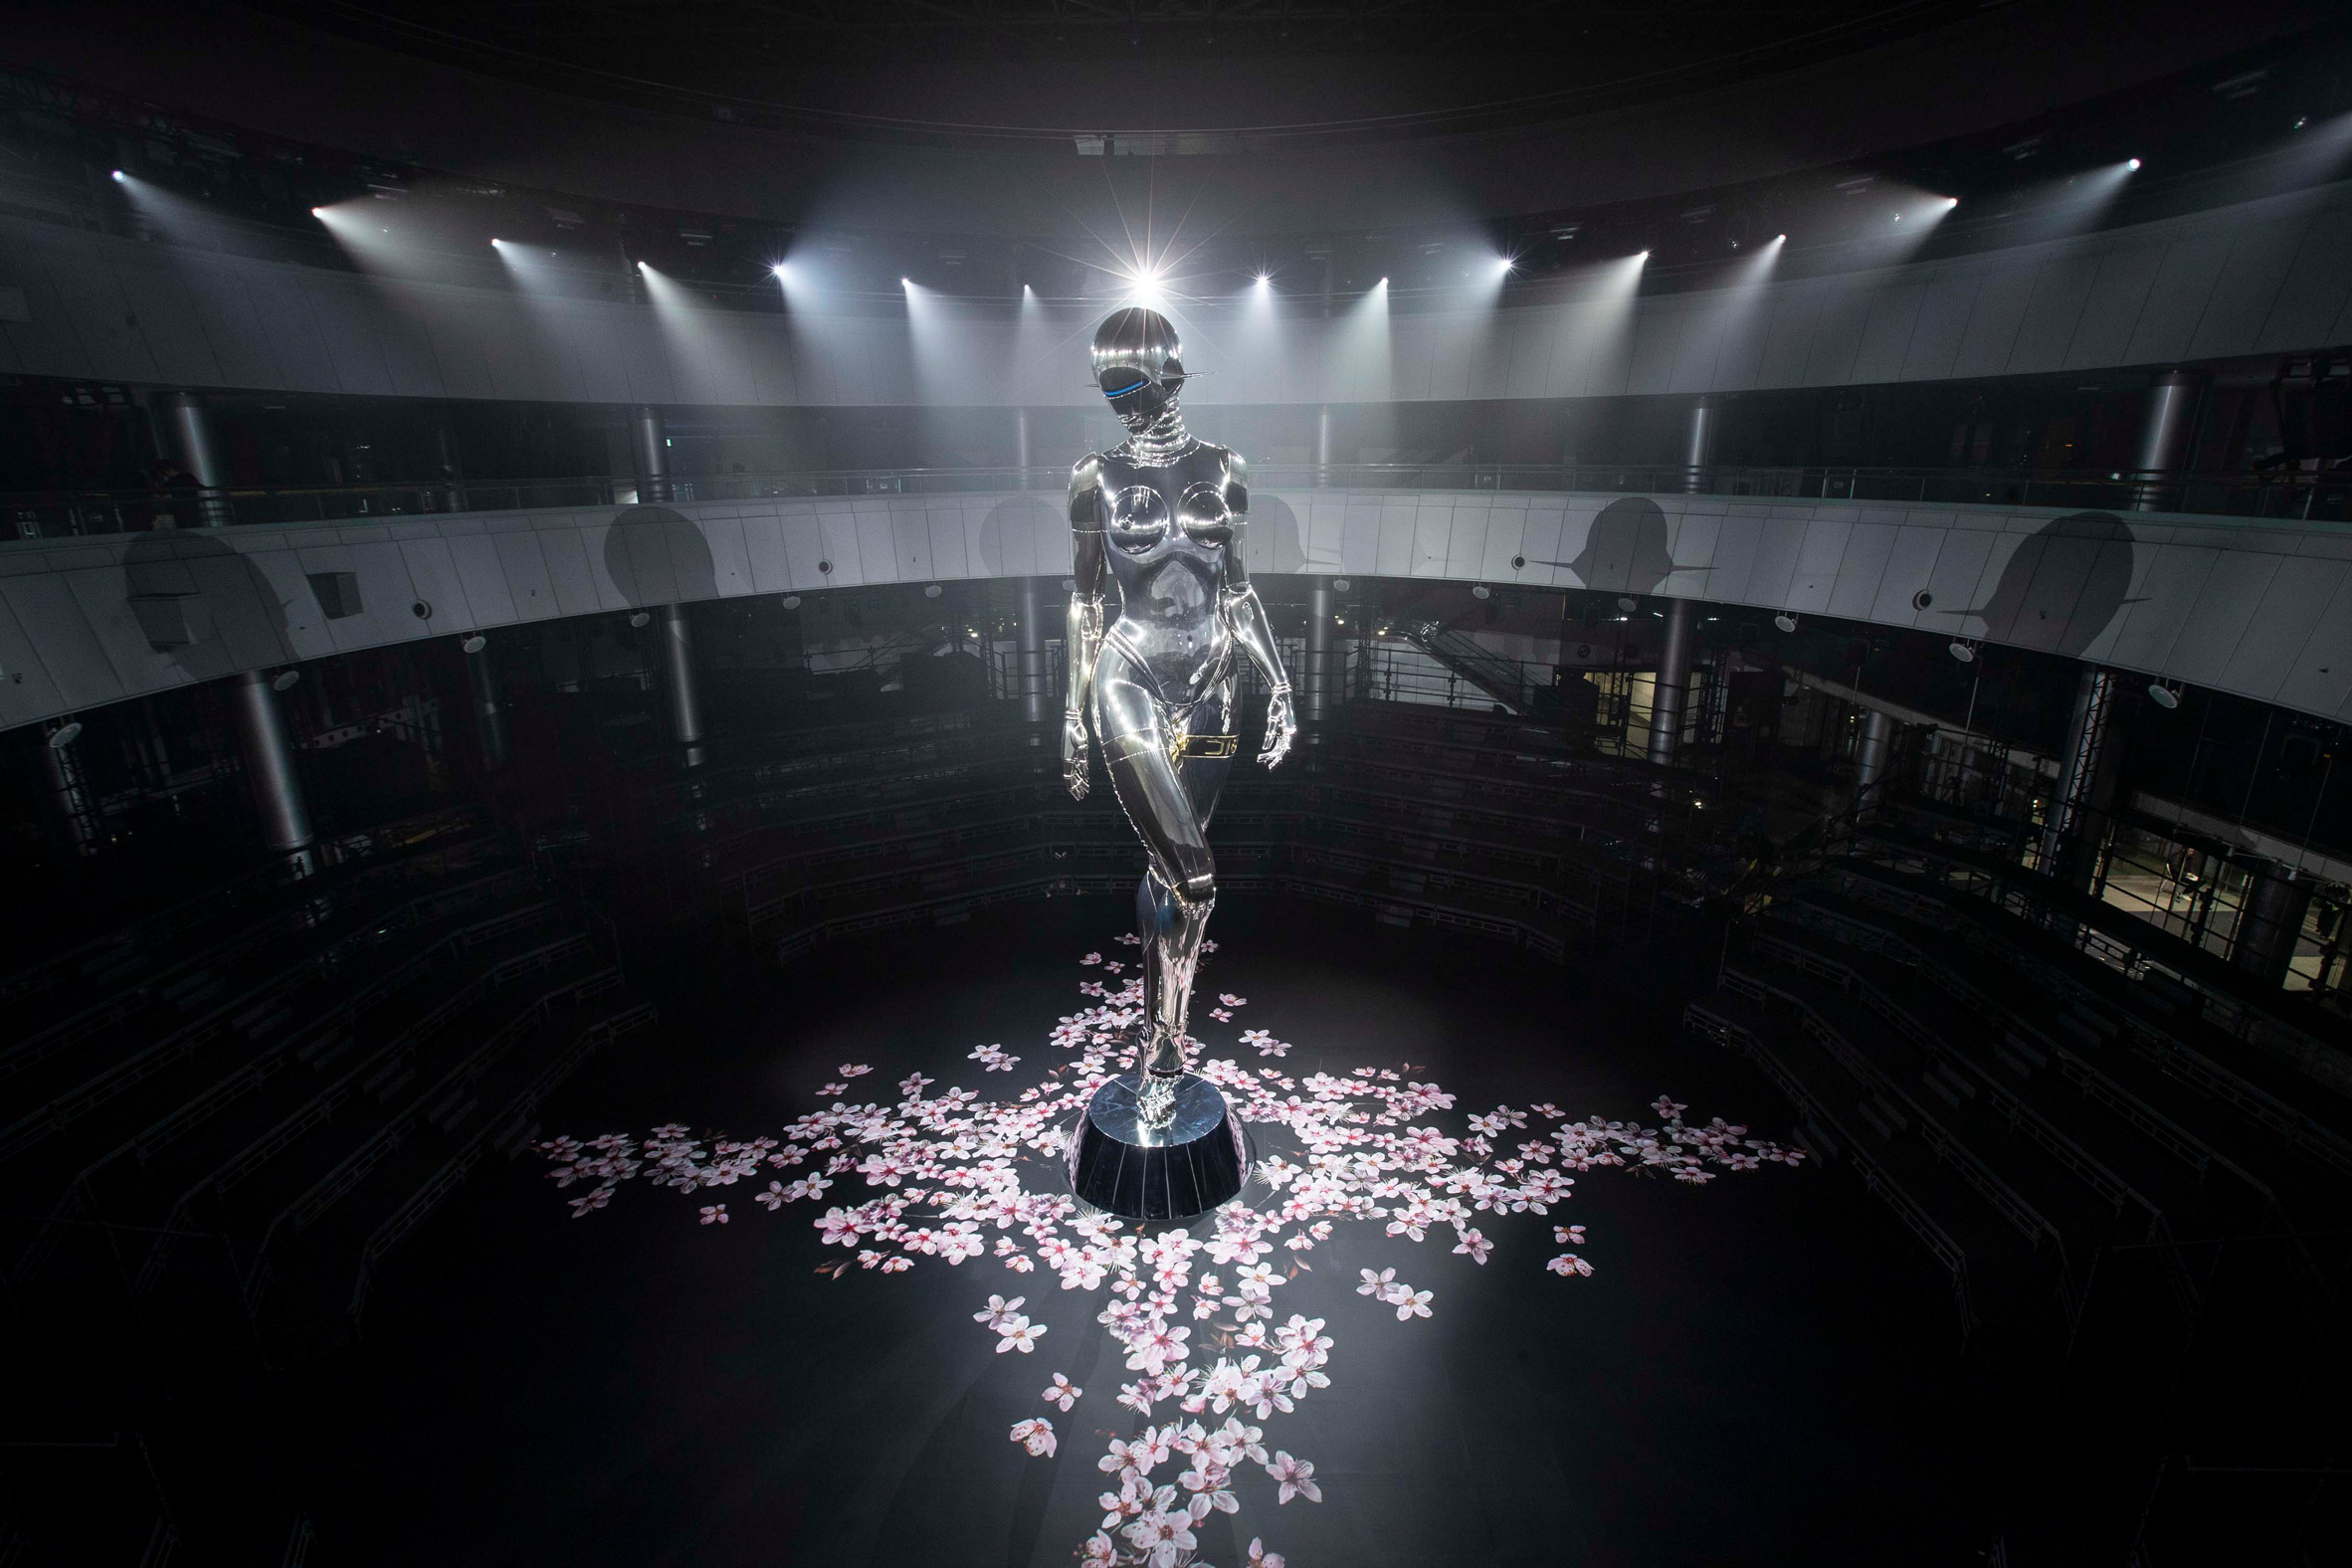 Dior commissioned Hajime Soramaya to build a 12 metre tall sculpture of a robot